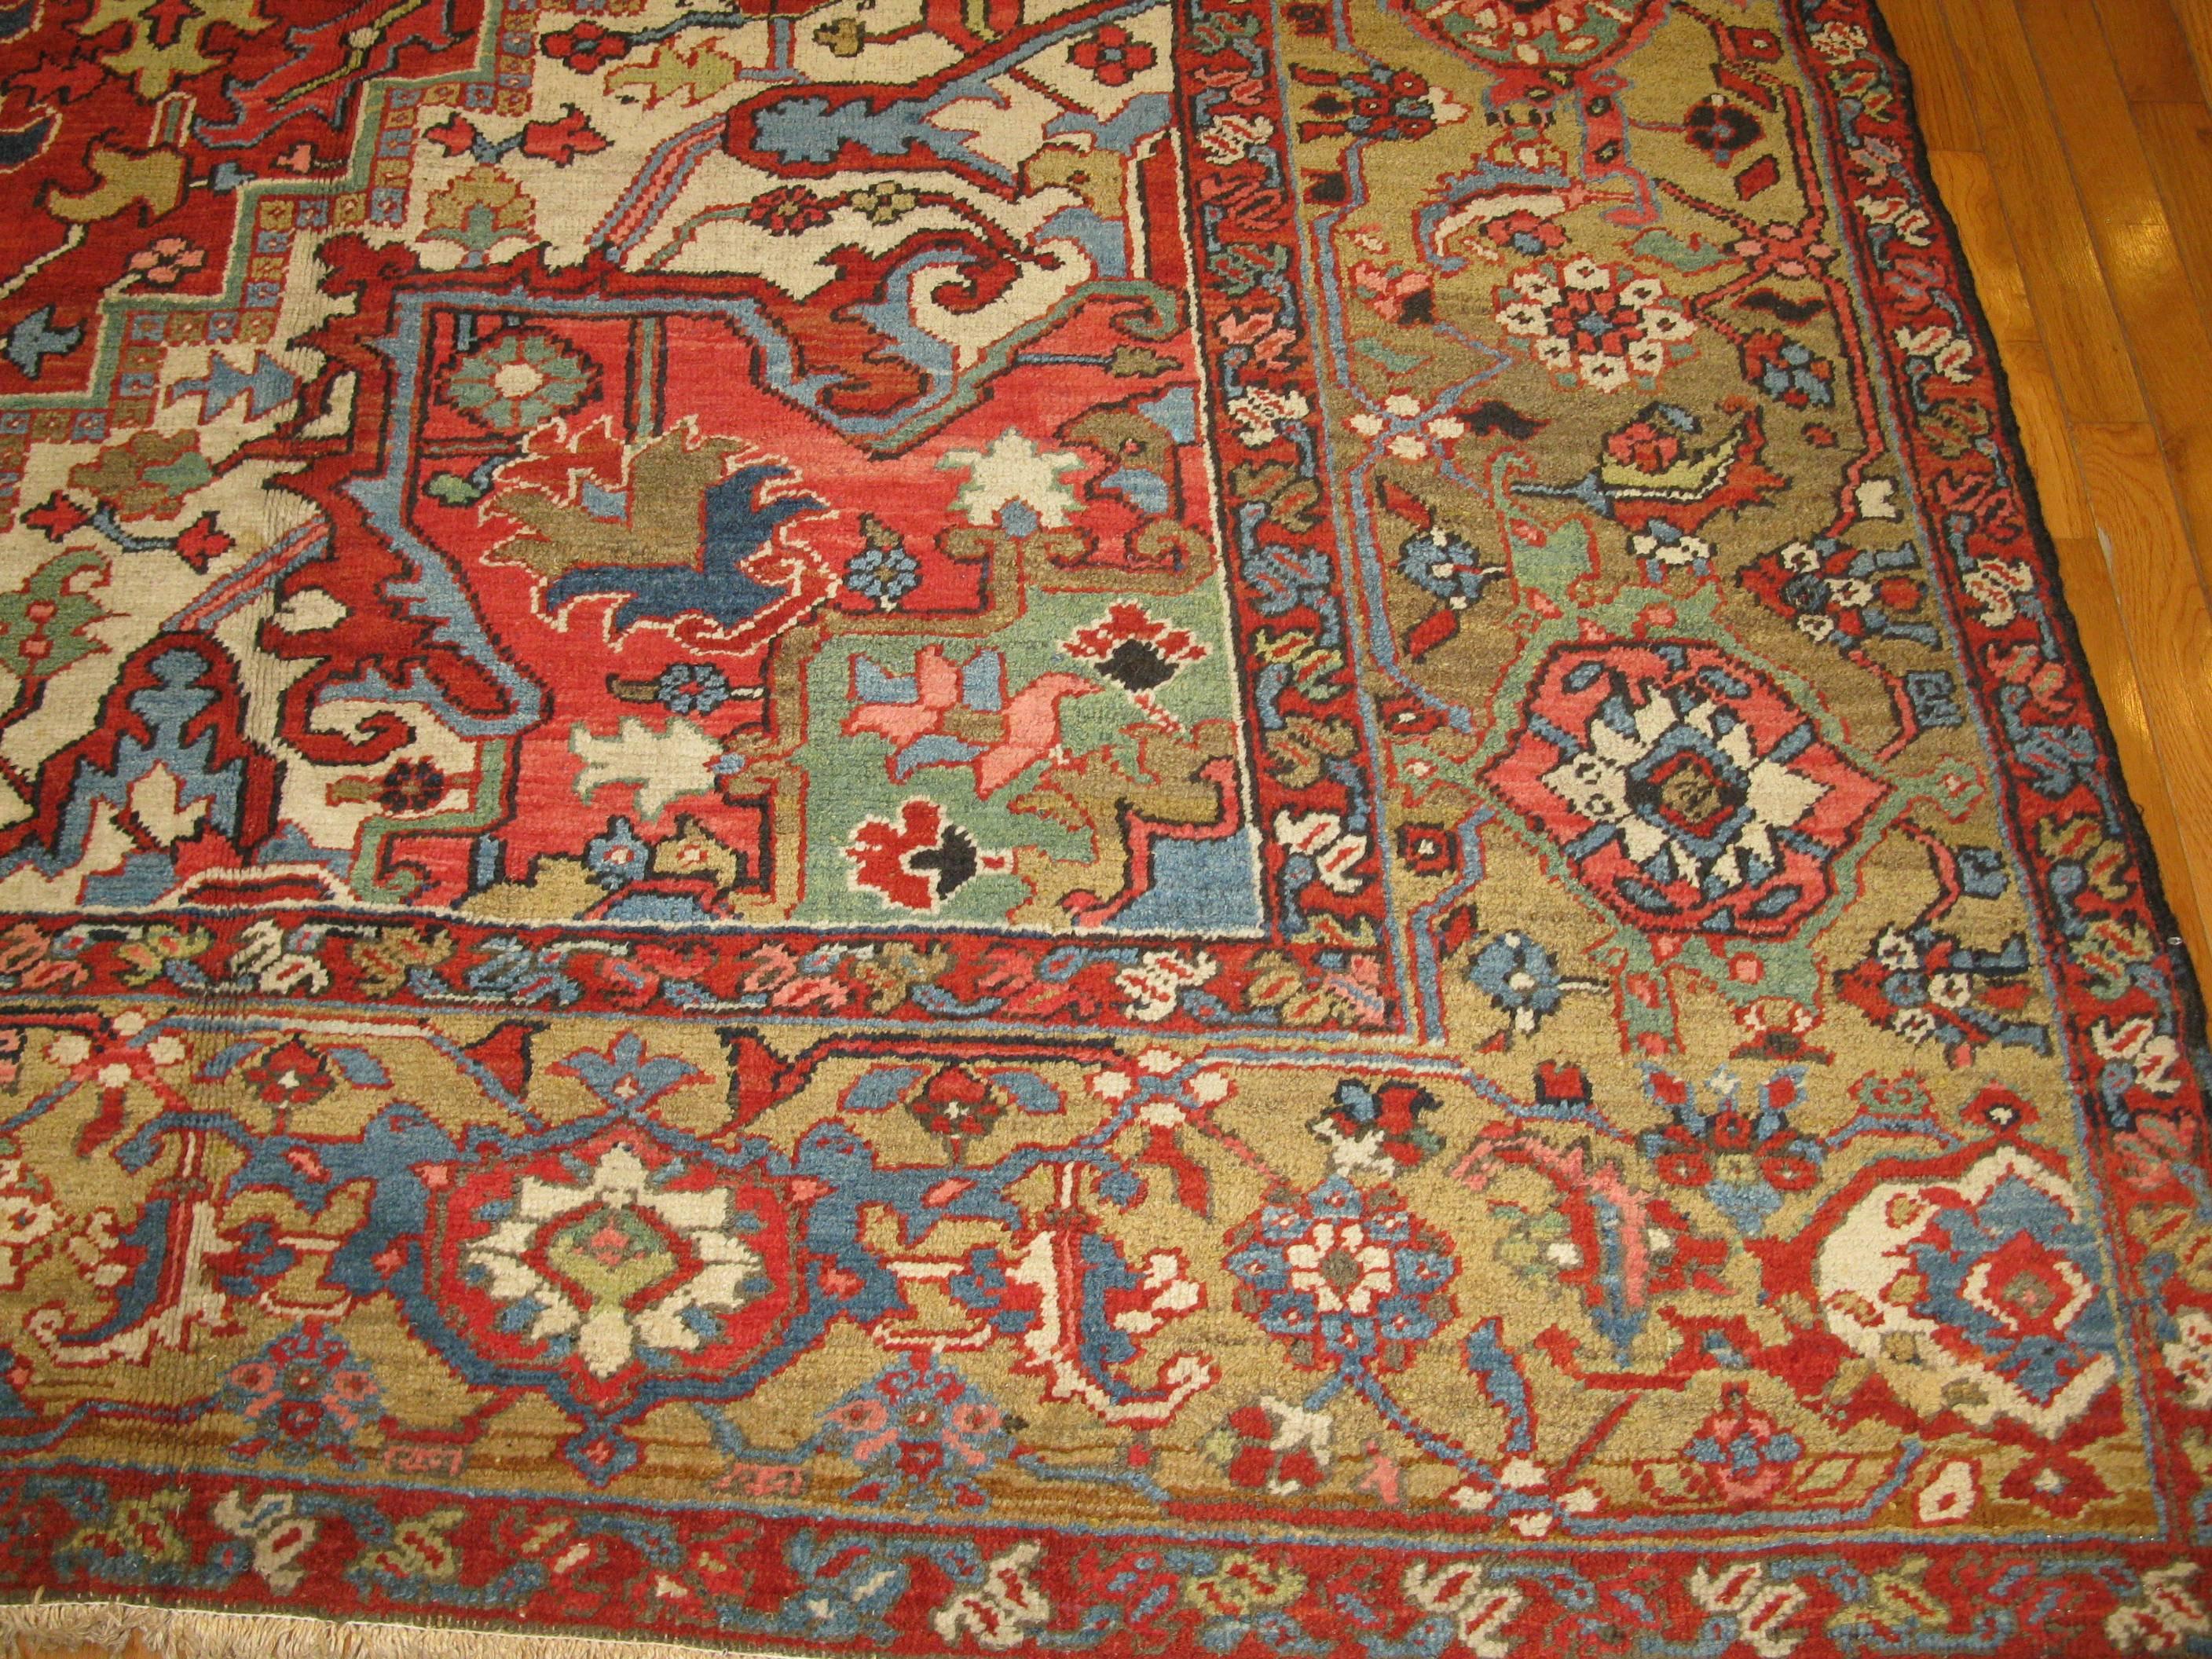 Large Antique Hand-KnottedWool Green Red Persian Heriz Rug In Excellent Condition For Sale In Atlanta, GA